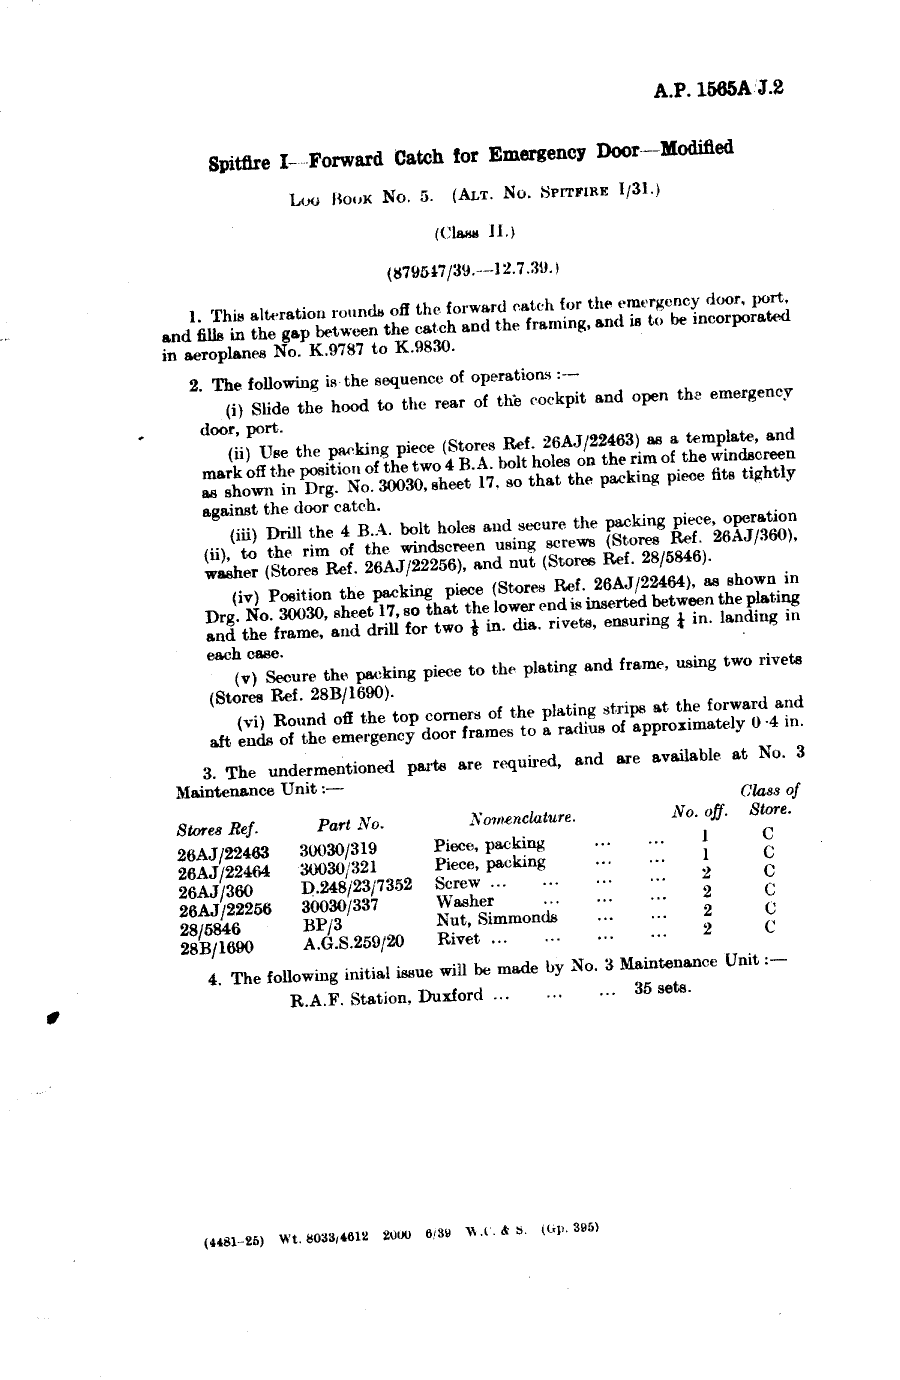 Sample page 1 from AirCorps Library document: Spitfire I Forward Catch for Emergency Door Modified